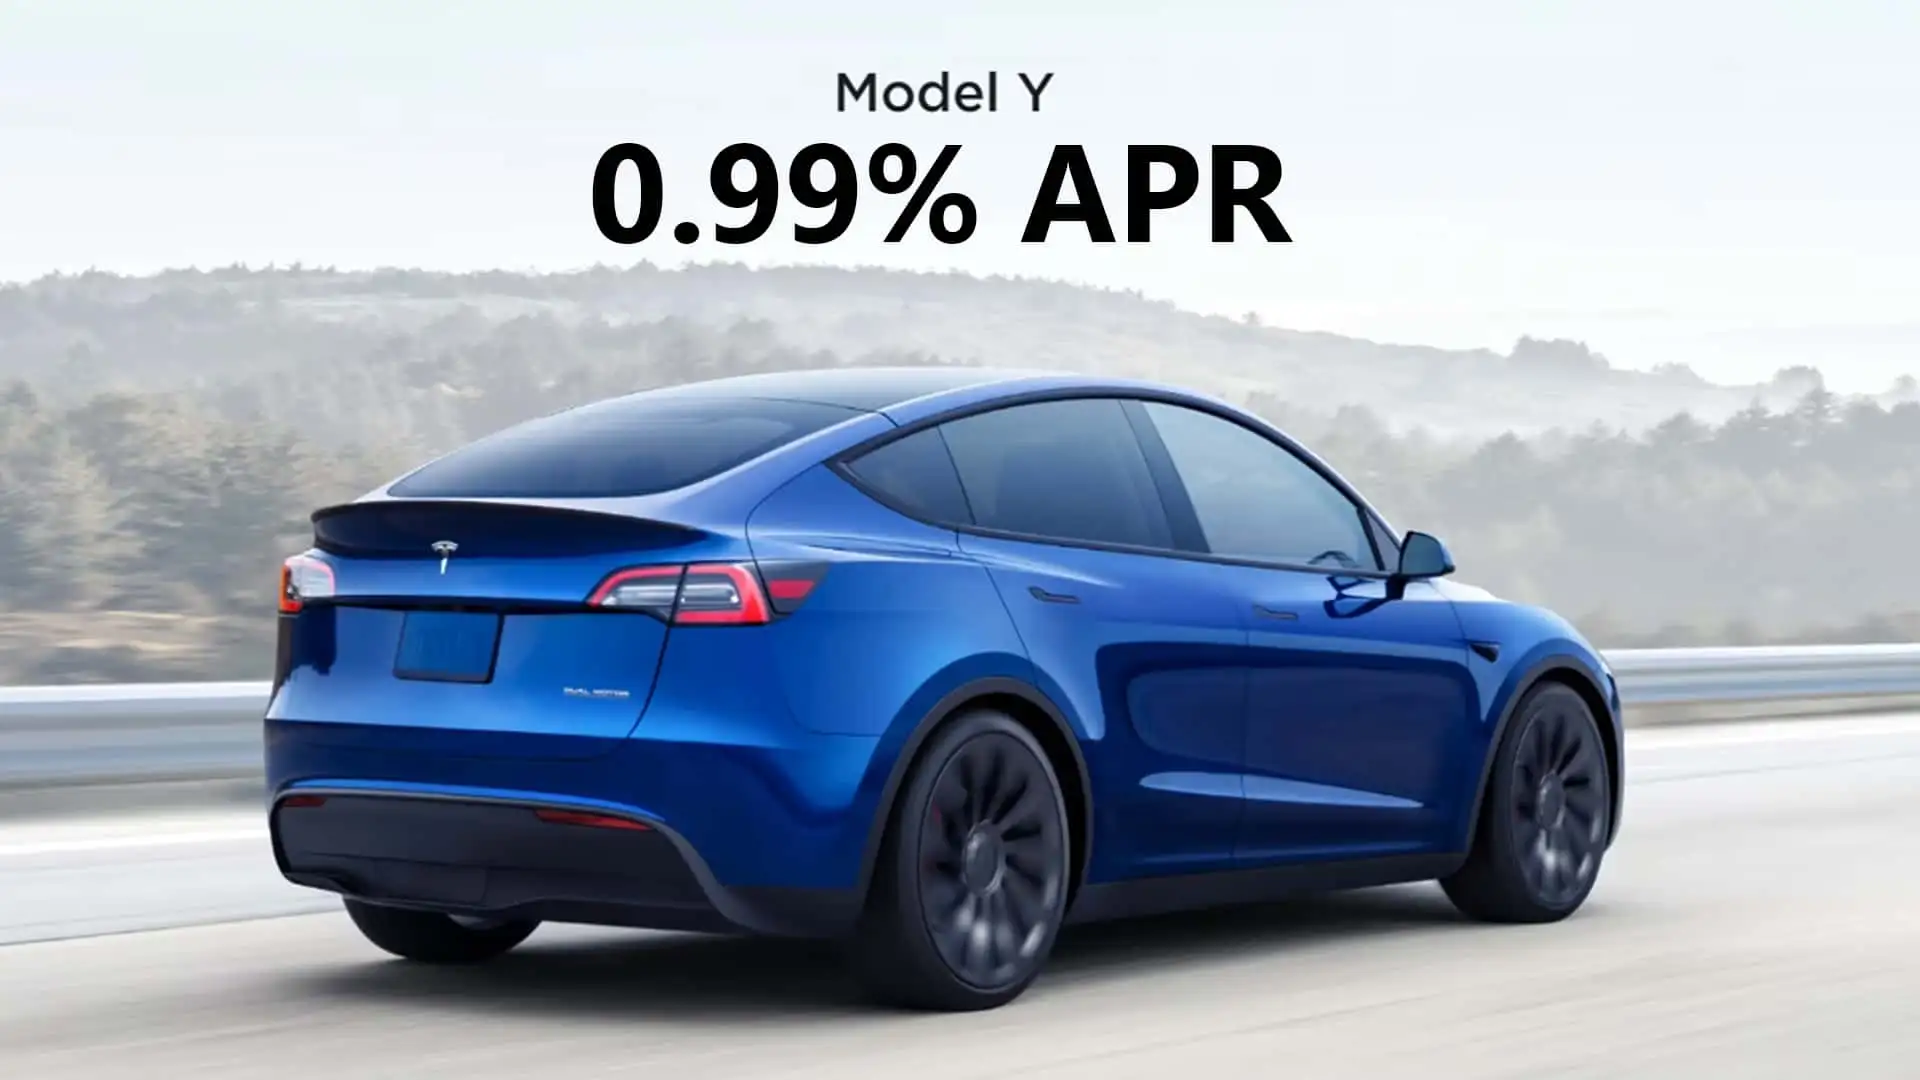 Grab This Deal Tesla Model Y Now With Unbelievable Low-Interest Rate of Just 0.99% - Limited Time Offer